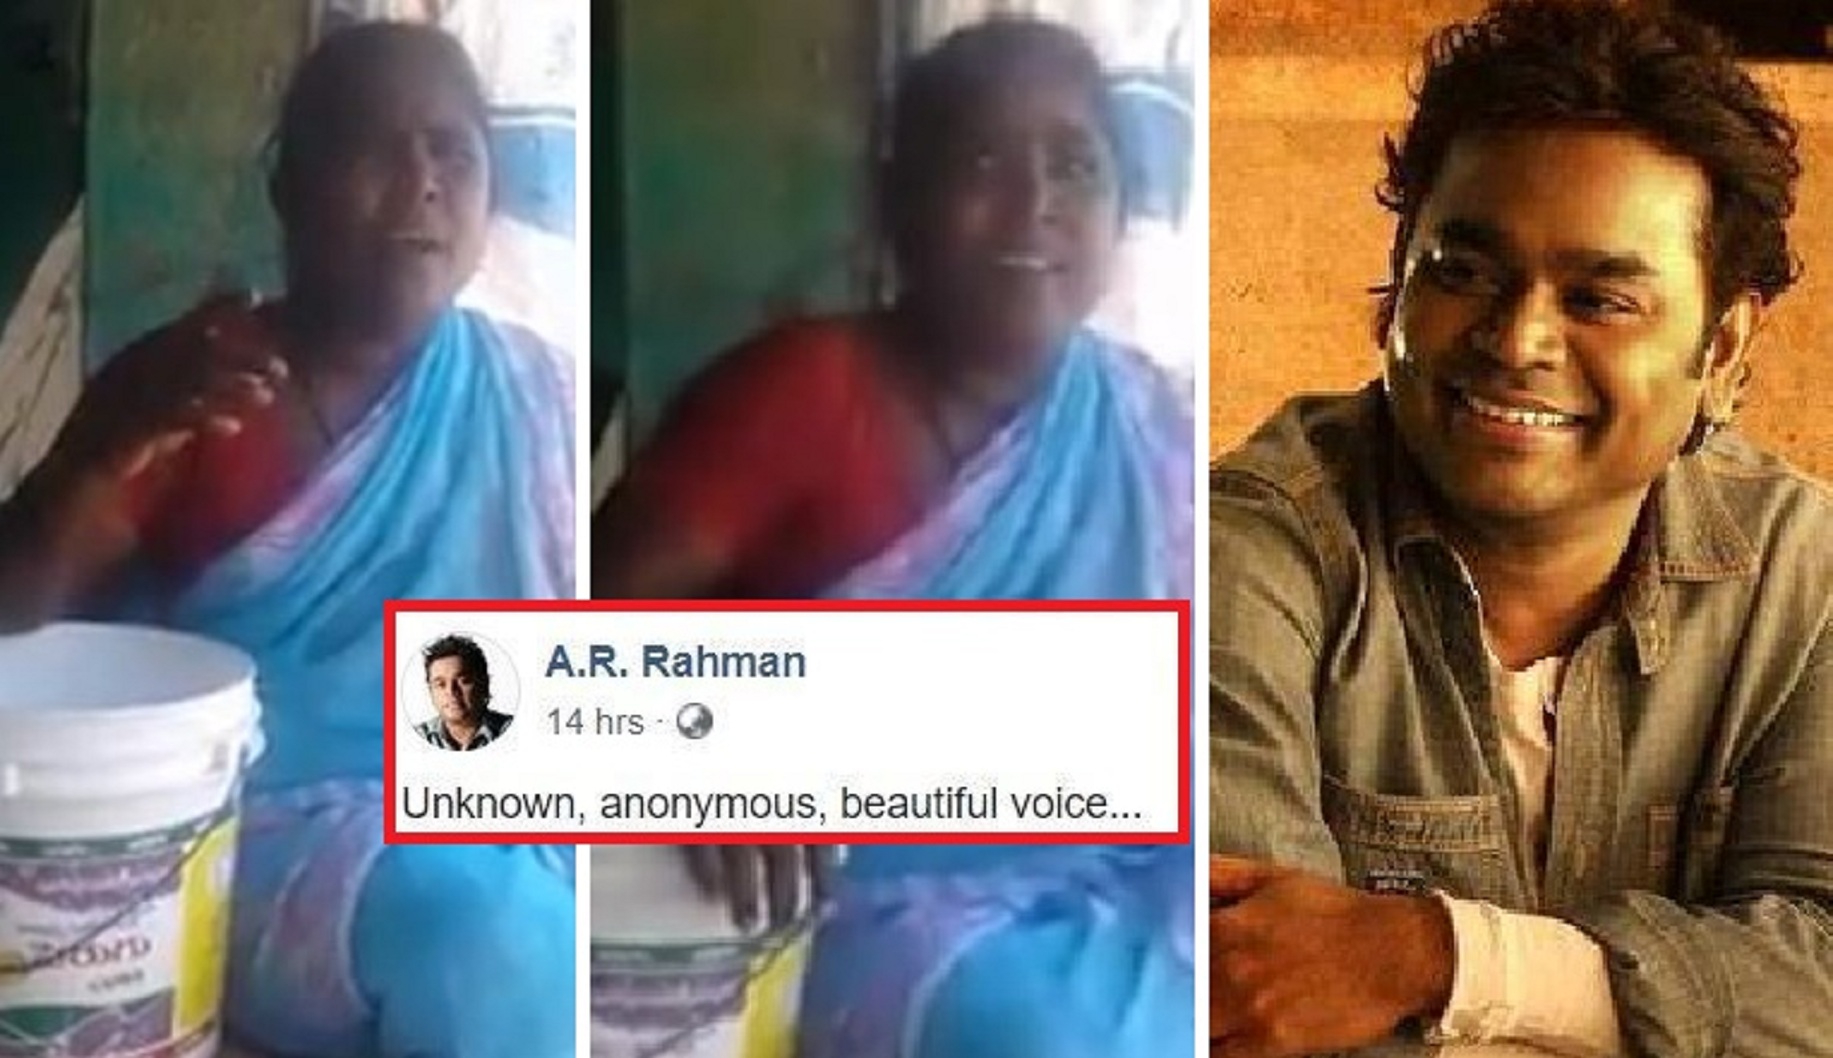 Video Of Andhra Woman’s Beautiful Singing Went So Viral, Even A.R. Rahman Shared It!